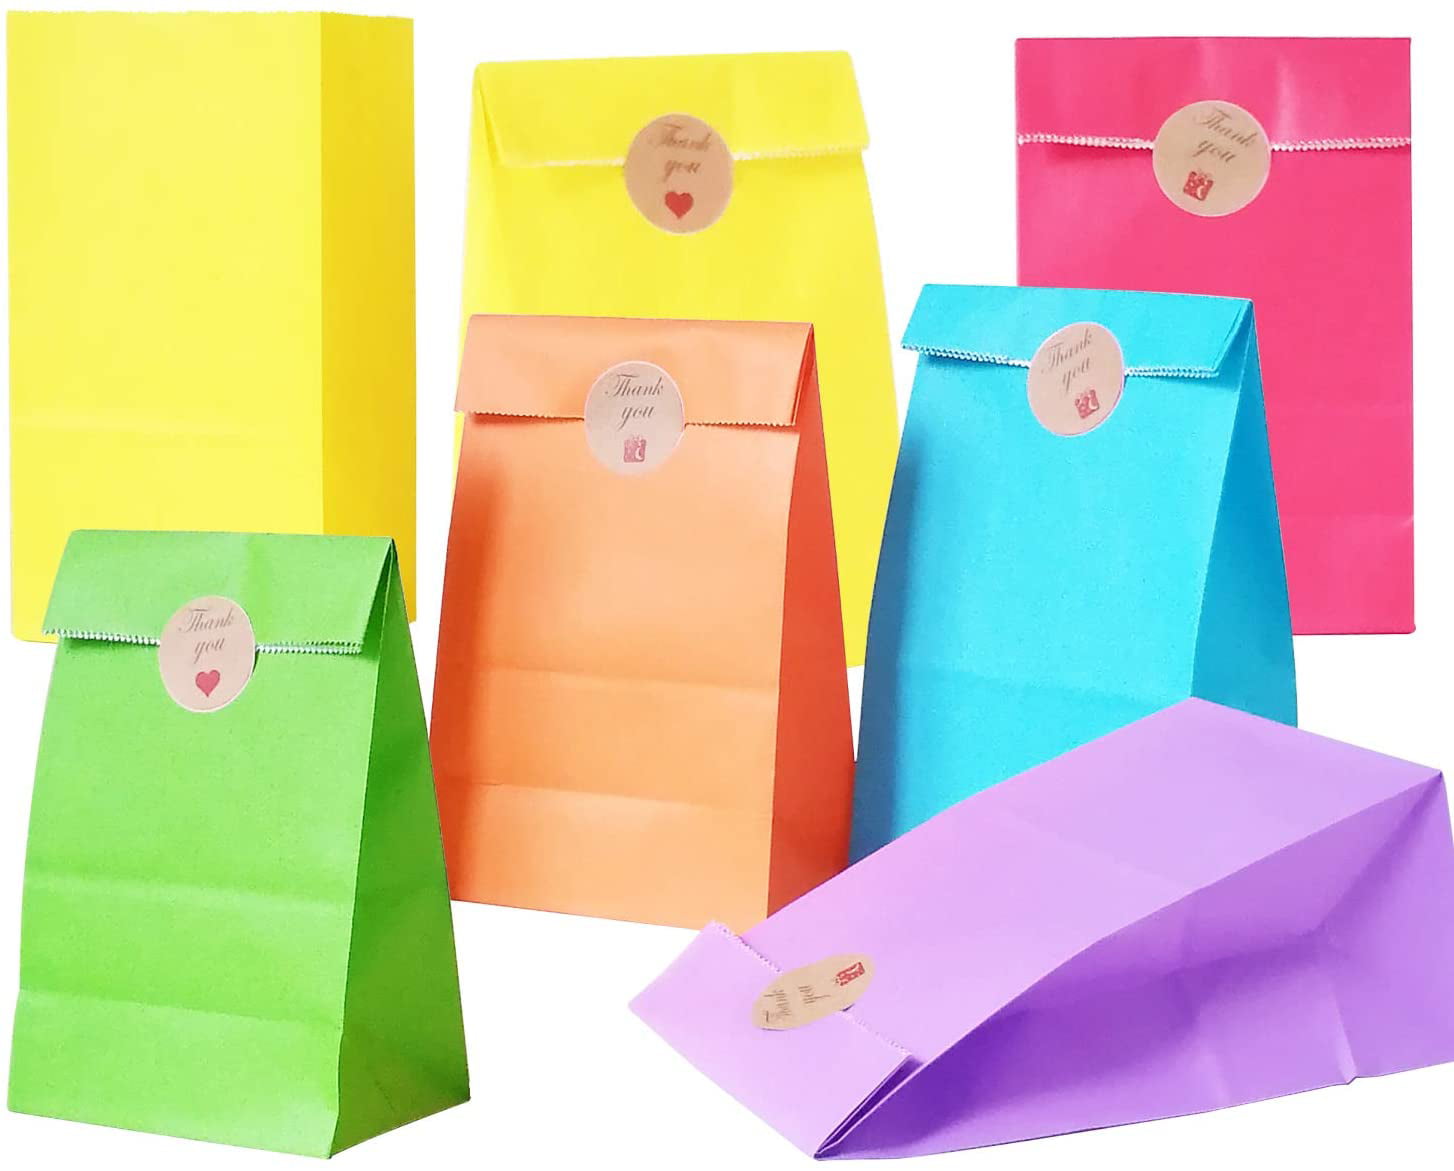 Details about   Plain Gift Bag Wedding Candy loot bag Graduation Birthday 10 Pcs Solid Colours 